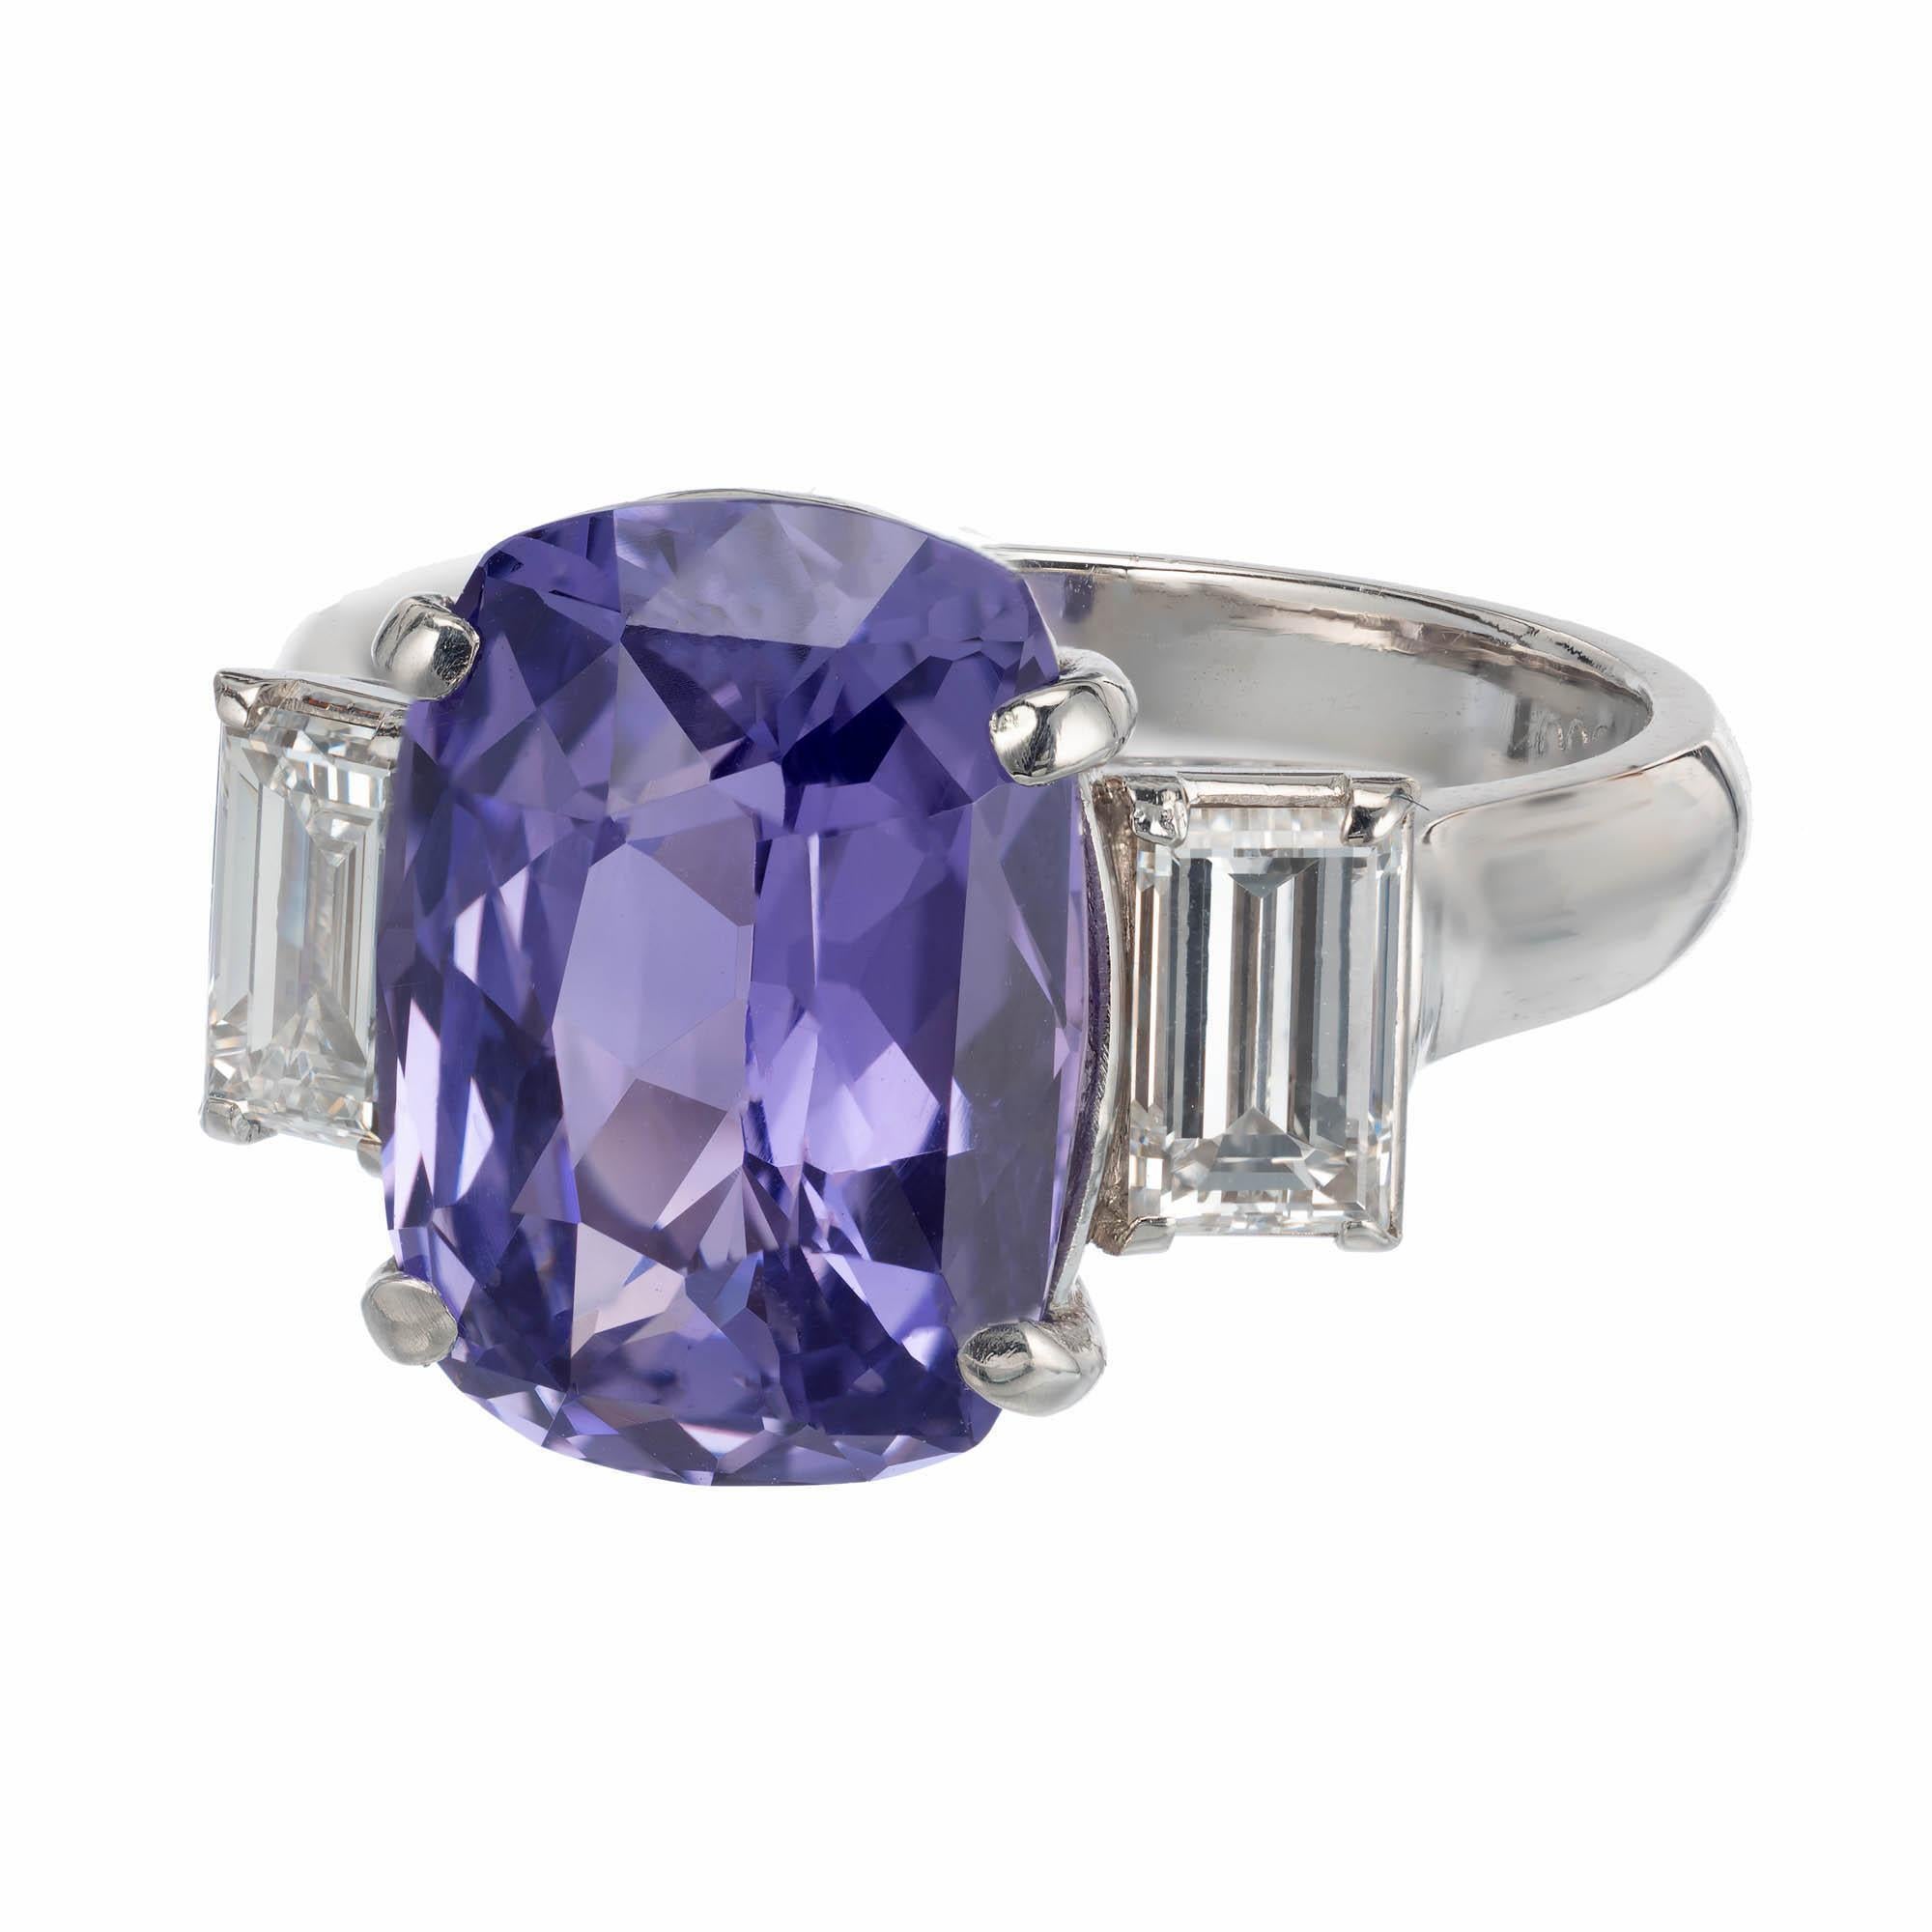 Violet sapphire and diamond three-stone engagement ring. 5.44 carat cushion cut natural sapphire is from a 1900s estate, accented with 2 emerald cut diamonds in a platinum setting, crafted in the Peter Suchy Workshop.

1 cushion brilliant cut violet